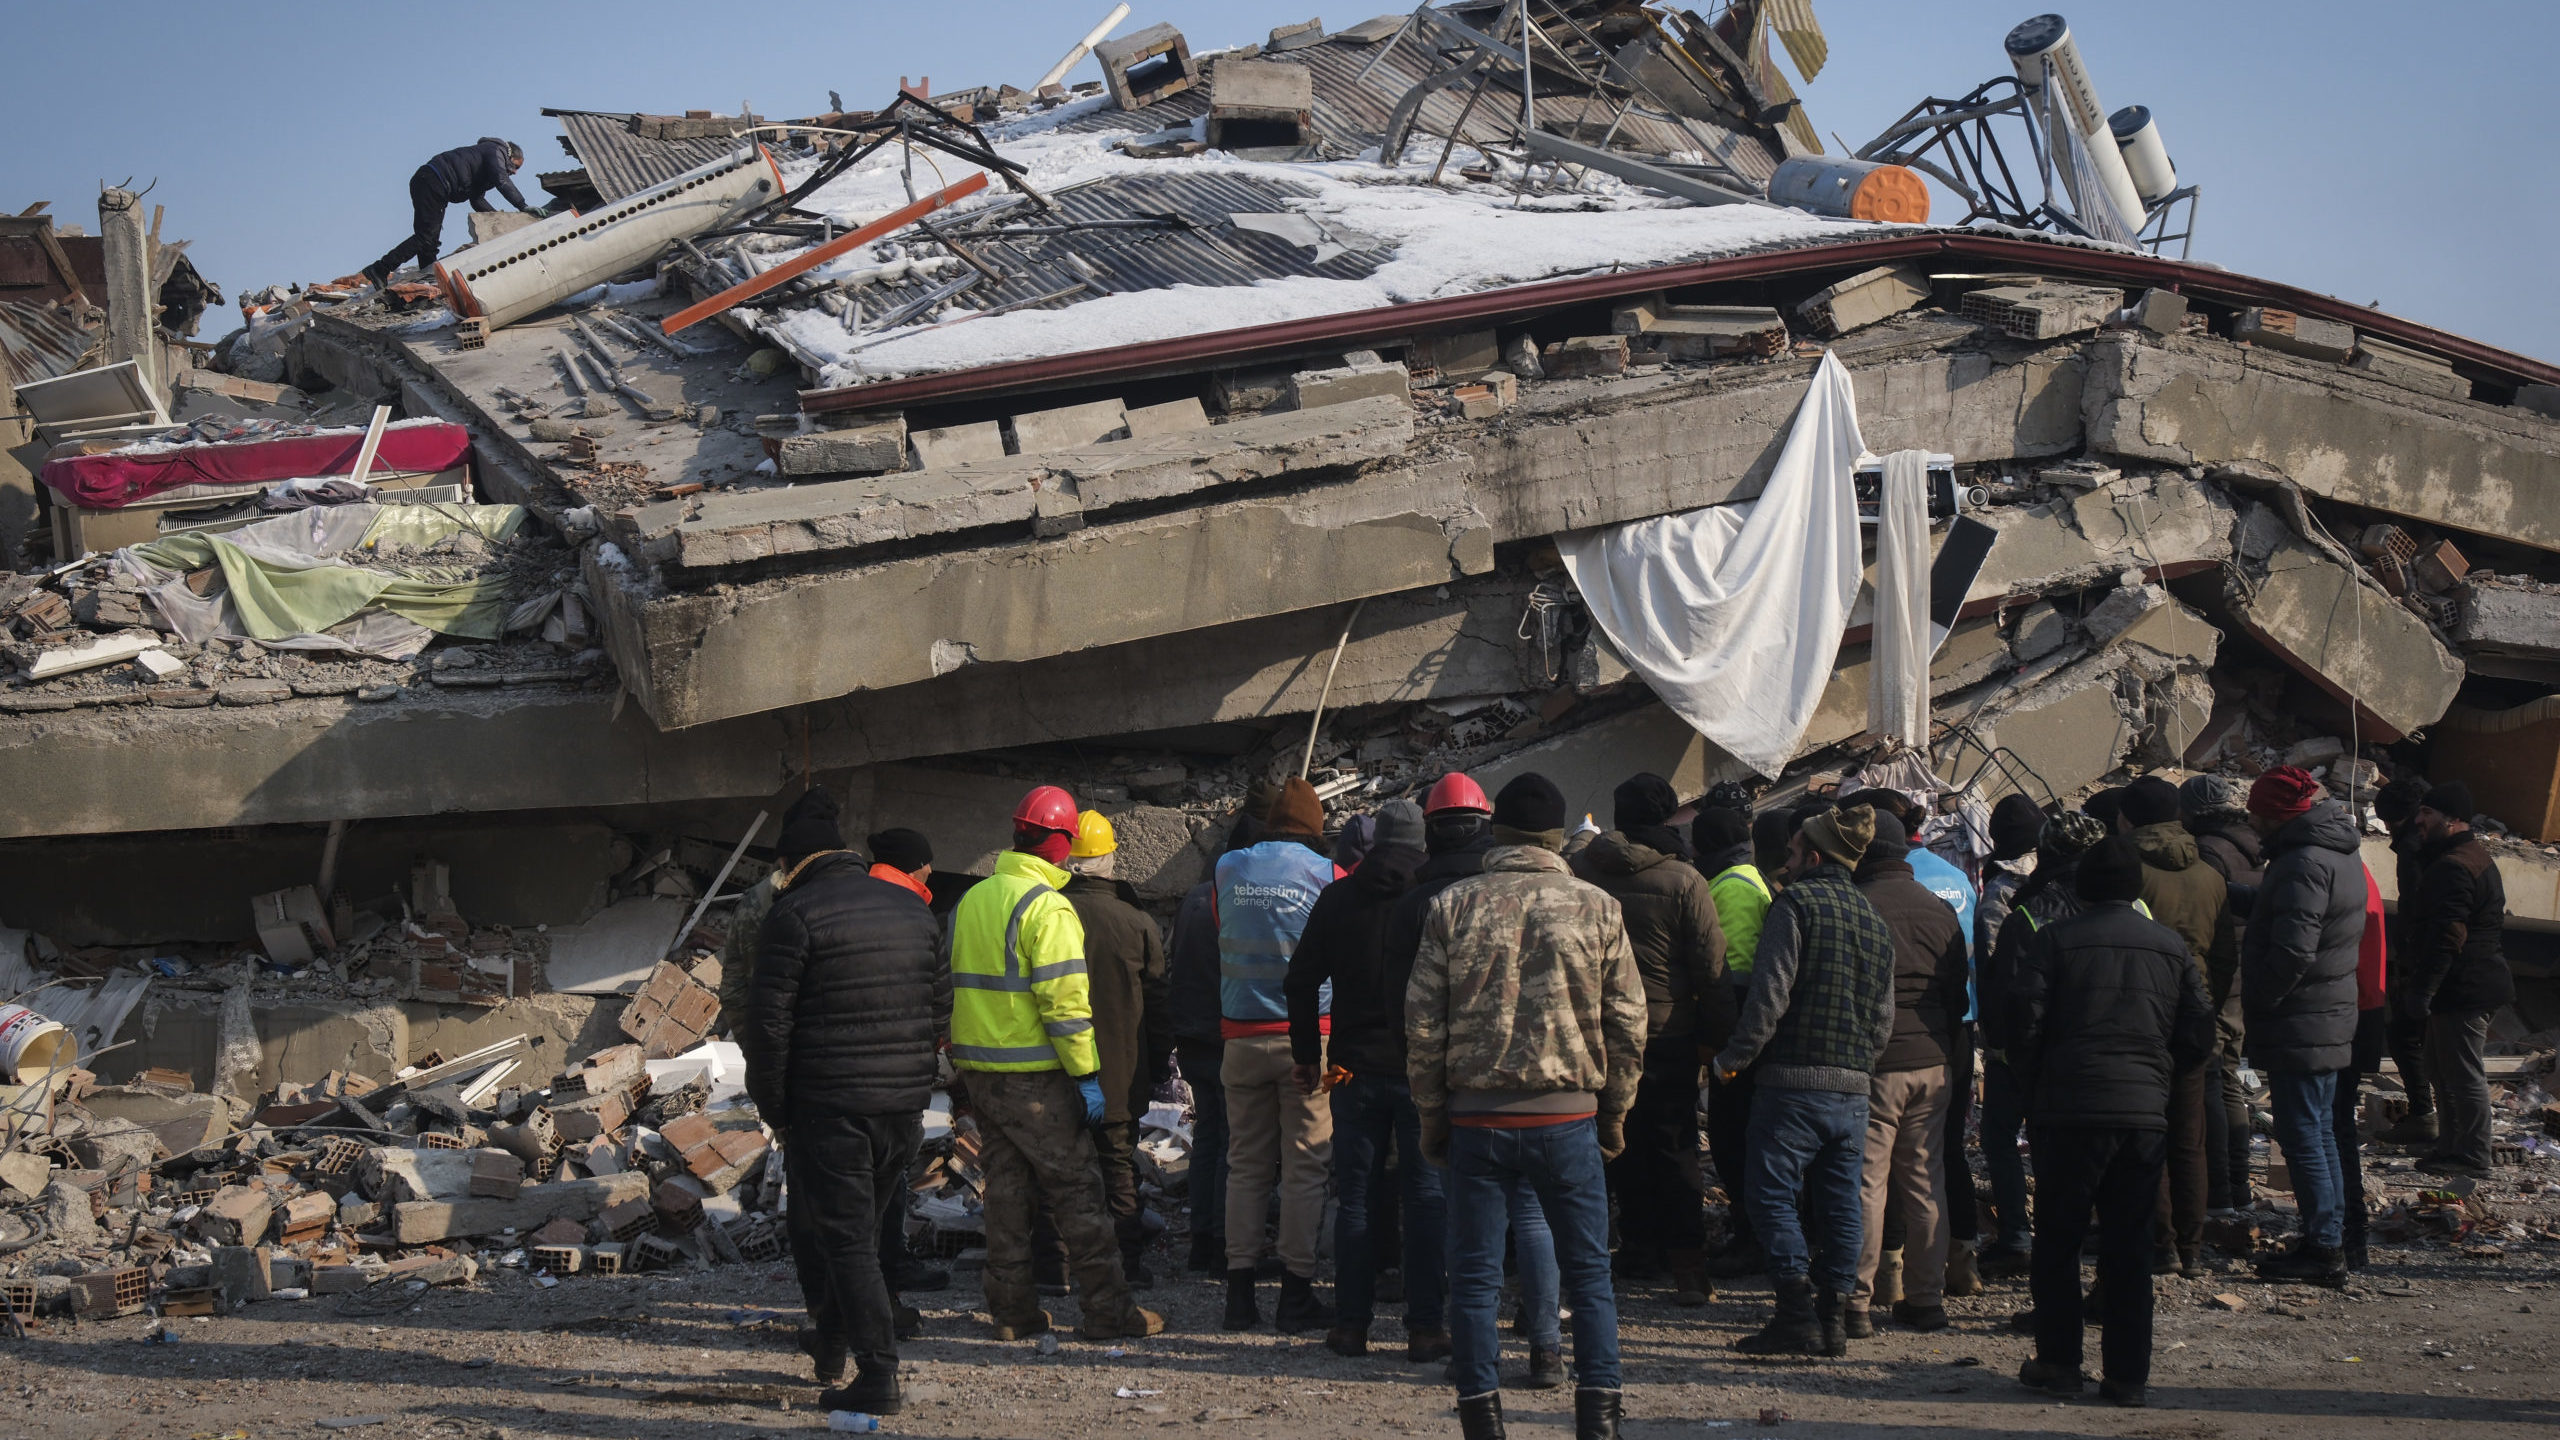 Building codes in the country of Turkey come into view as the death toll surpasses 20,000 after str...